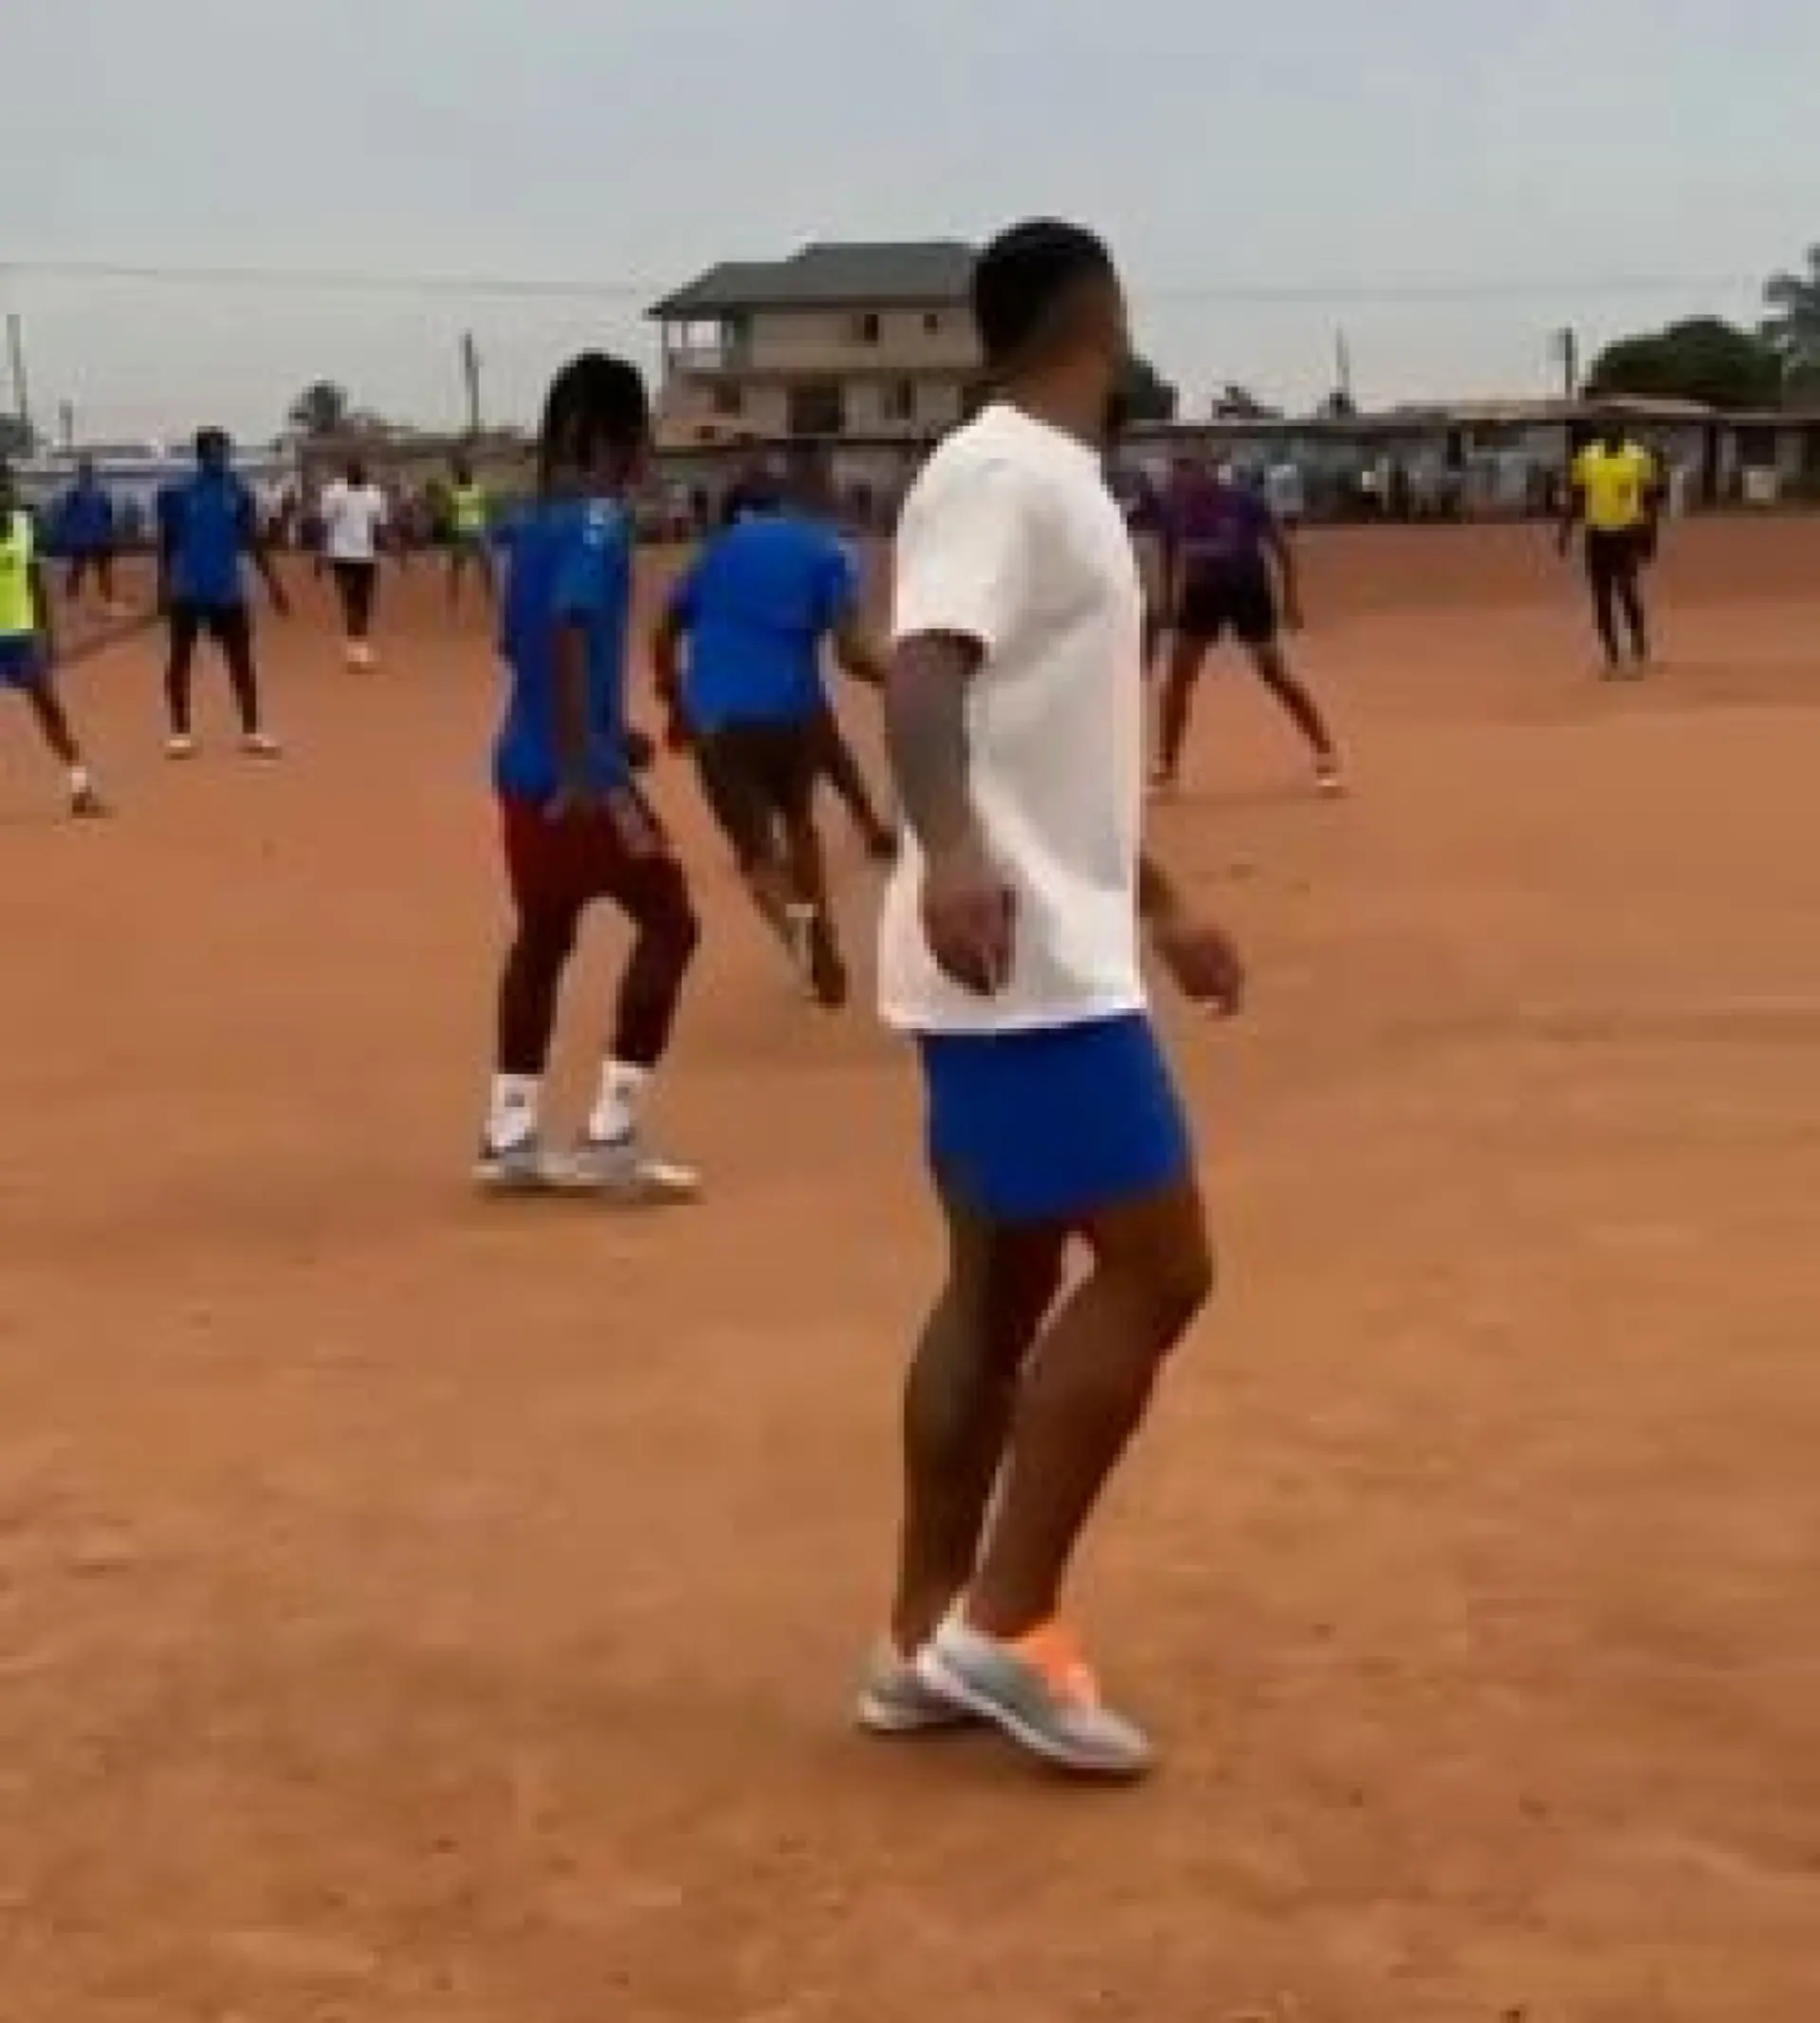 e0f3d4bf 441a 4ff3 8056 7c87752c37d5?width=1920&quality=75 Memphis Depay spotted playing street football in Ghana